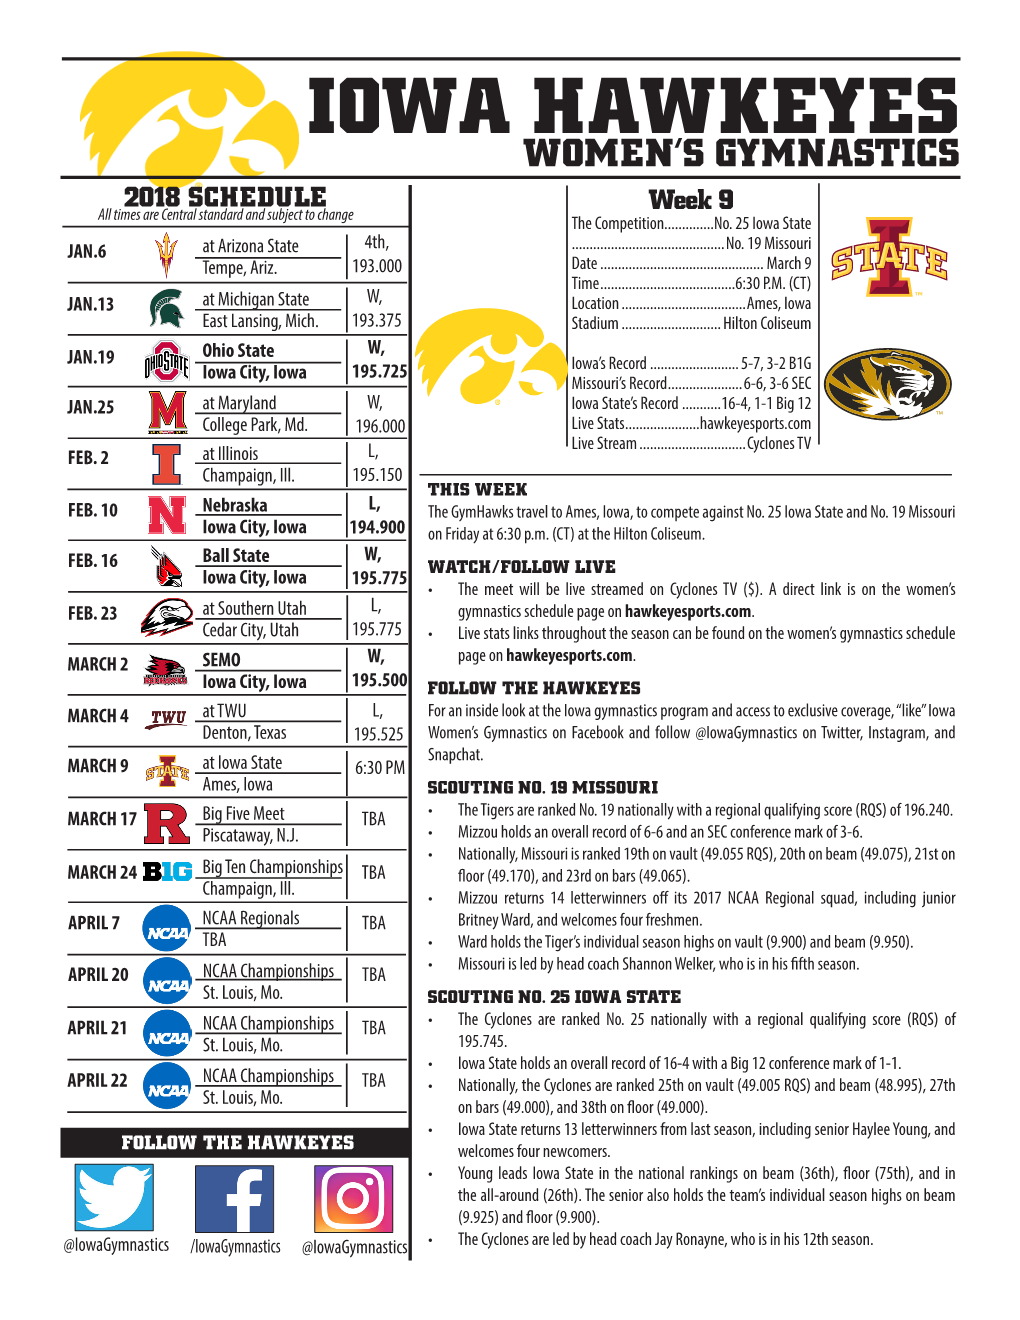 IOWA HAWKEYES WOMEN’S GYMNASTICS 2018 SCHEDULE Week 9 All Times Are Central Standard and Subject to Change the Competition